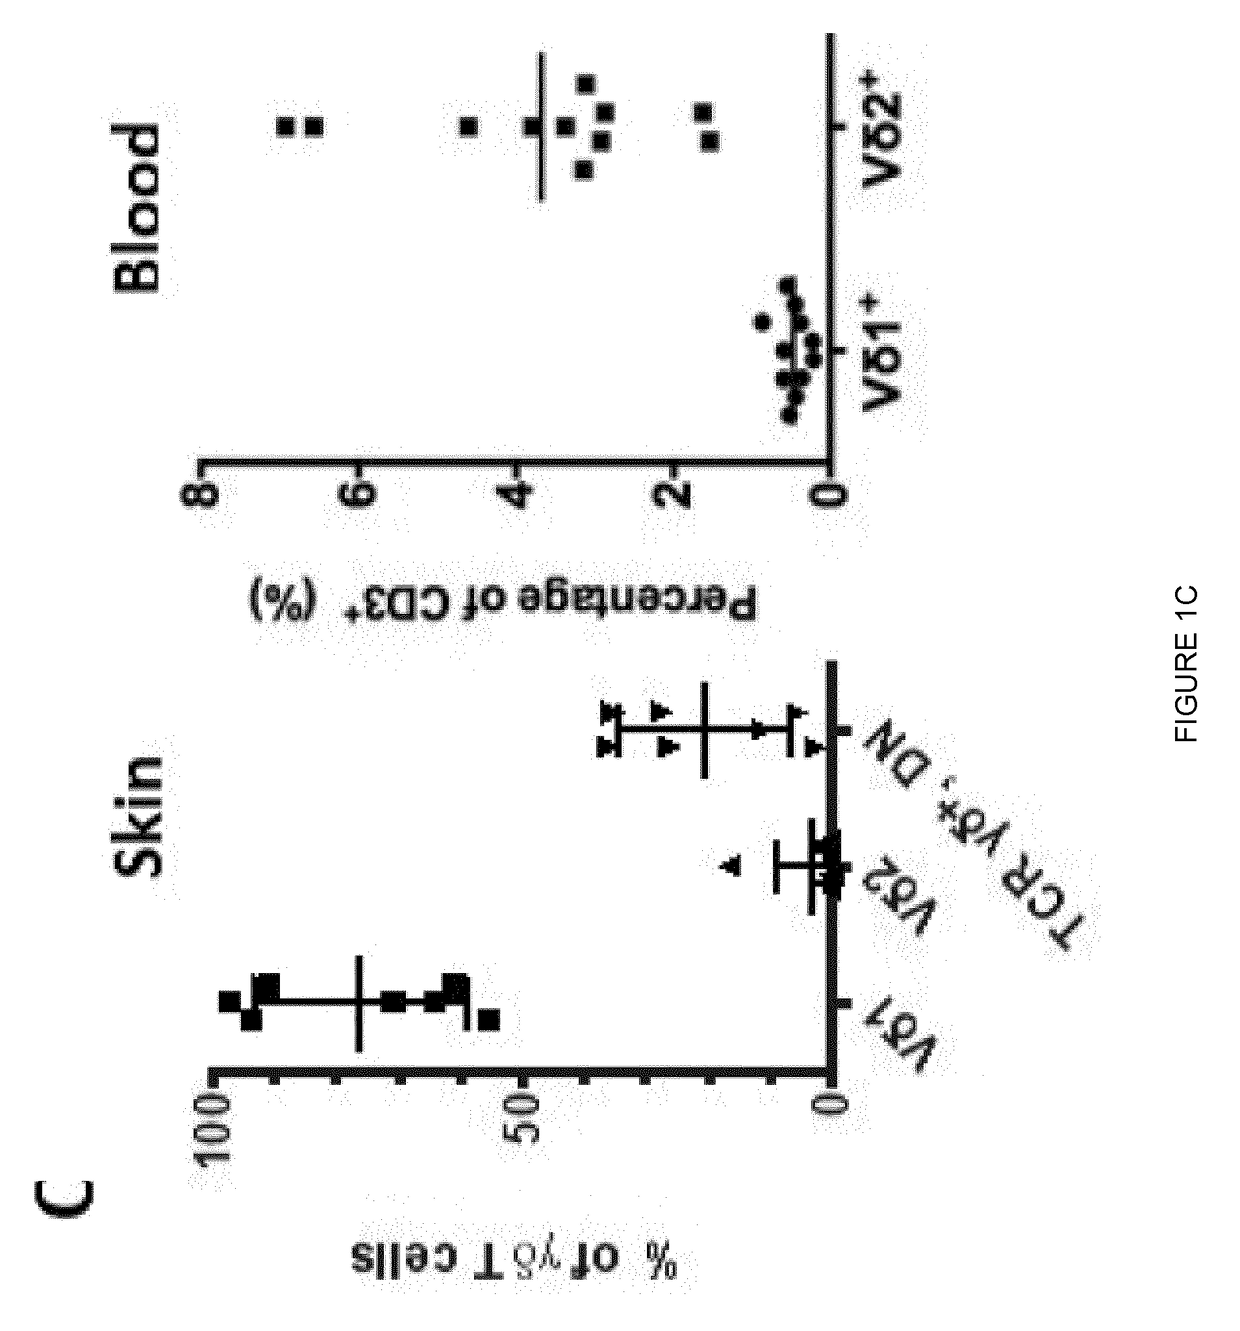 Expansion of non-haematopoietic tissue-resident gamma delta t cells and uses of these cells